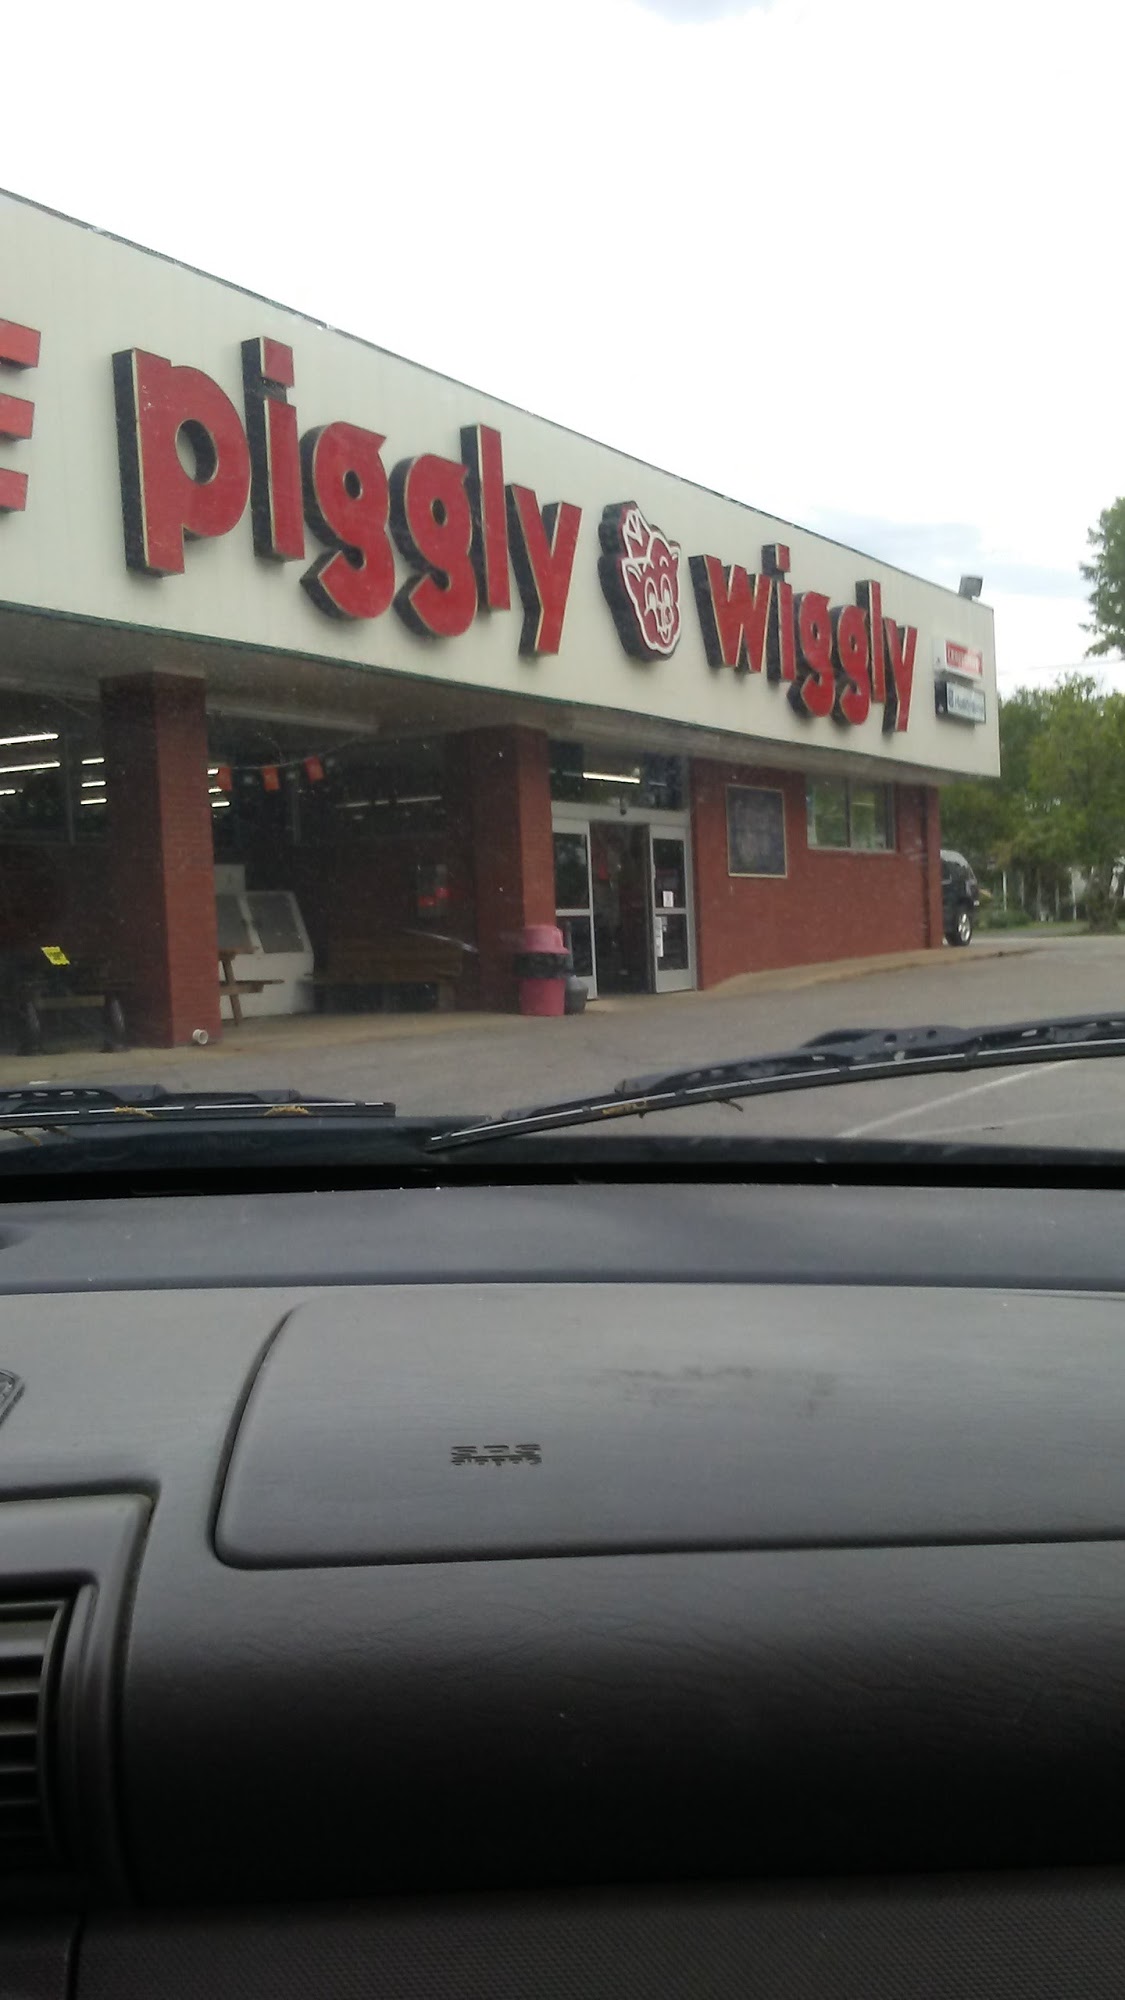 Piggly Wiggly/Ace Hardware